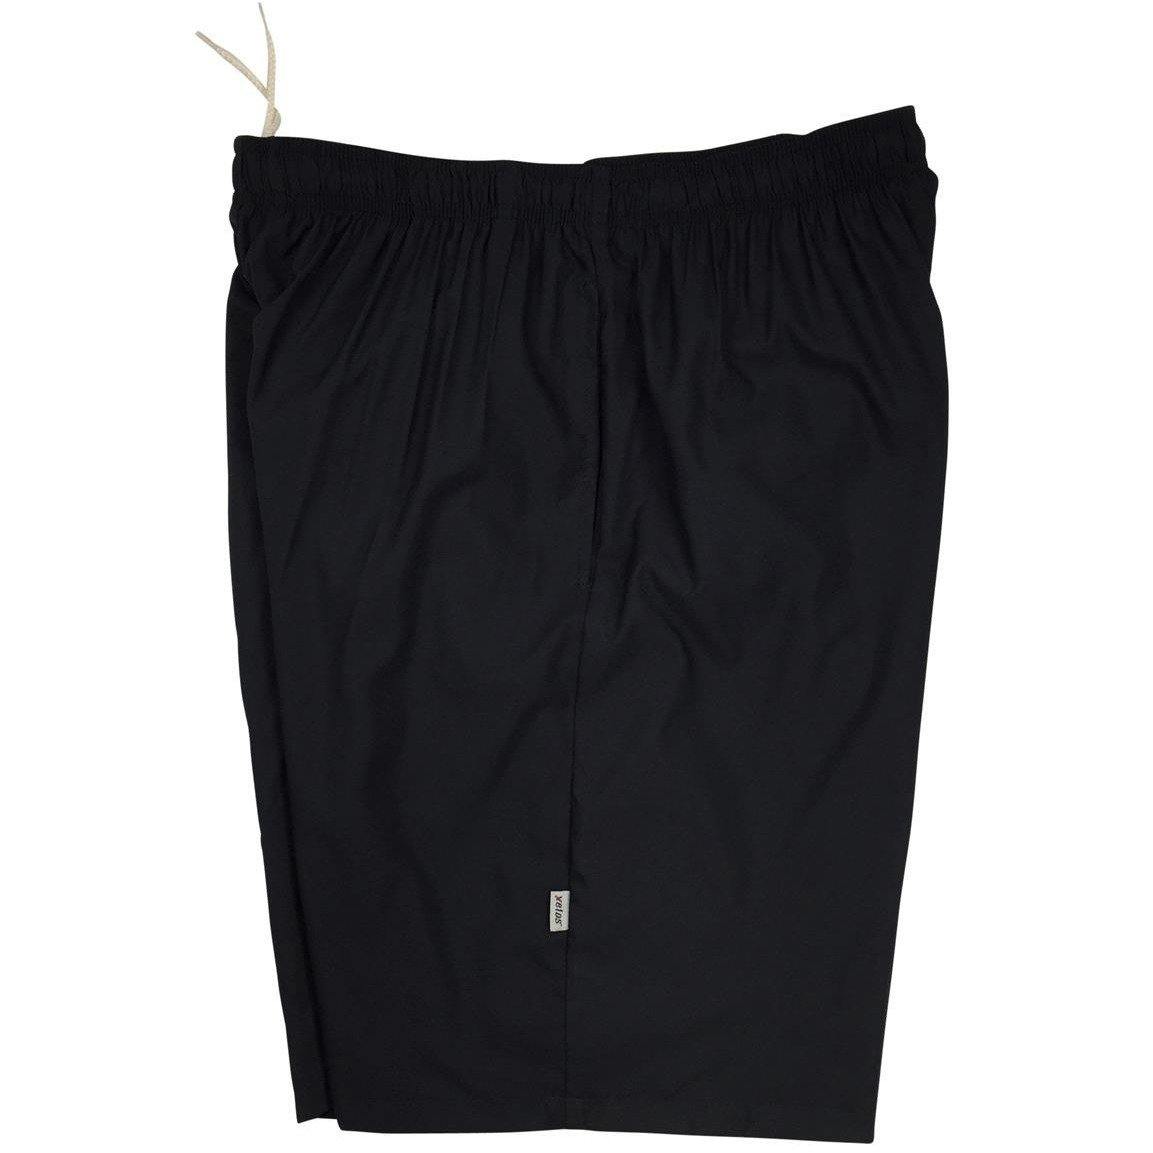 **Best Seller** "A Solid Color" Mens (9.5" Inseam / 22" Outseam) Swim Trunks (Black) - Board Shorts World